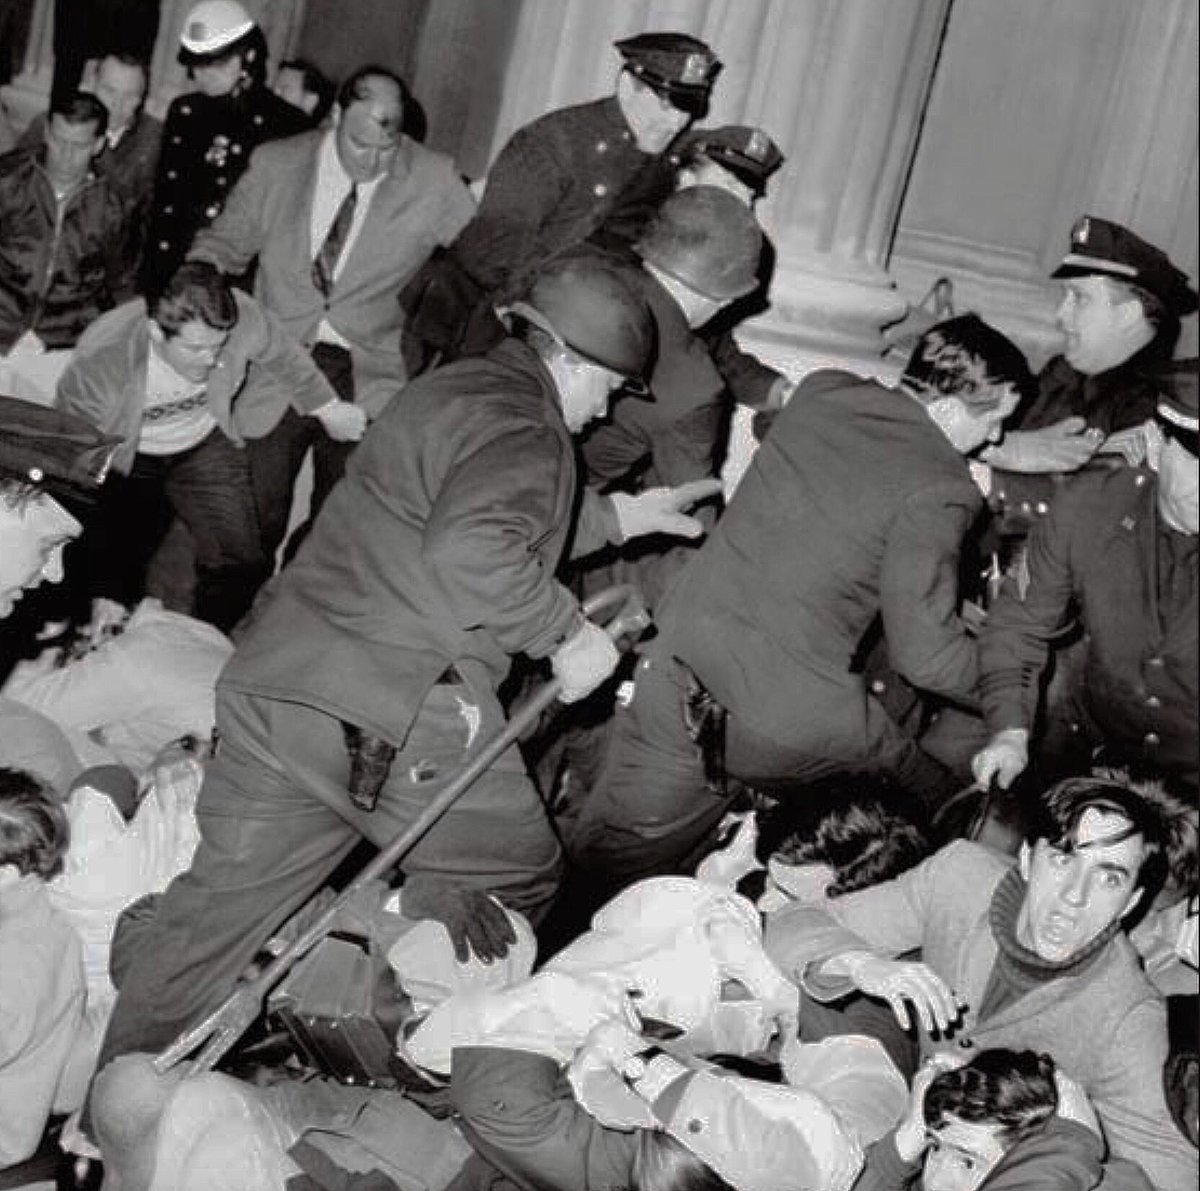 My dad was a CBS News man in the 1960s. He told me about covering the 1968 riots at Columbia & seeing police beat the hell out of students there. When a group of cops started removing their badges & approaching him & his team, they knew it was time to get the F out of dodge. 1/